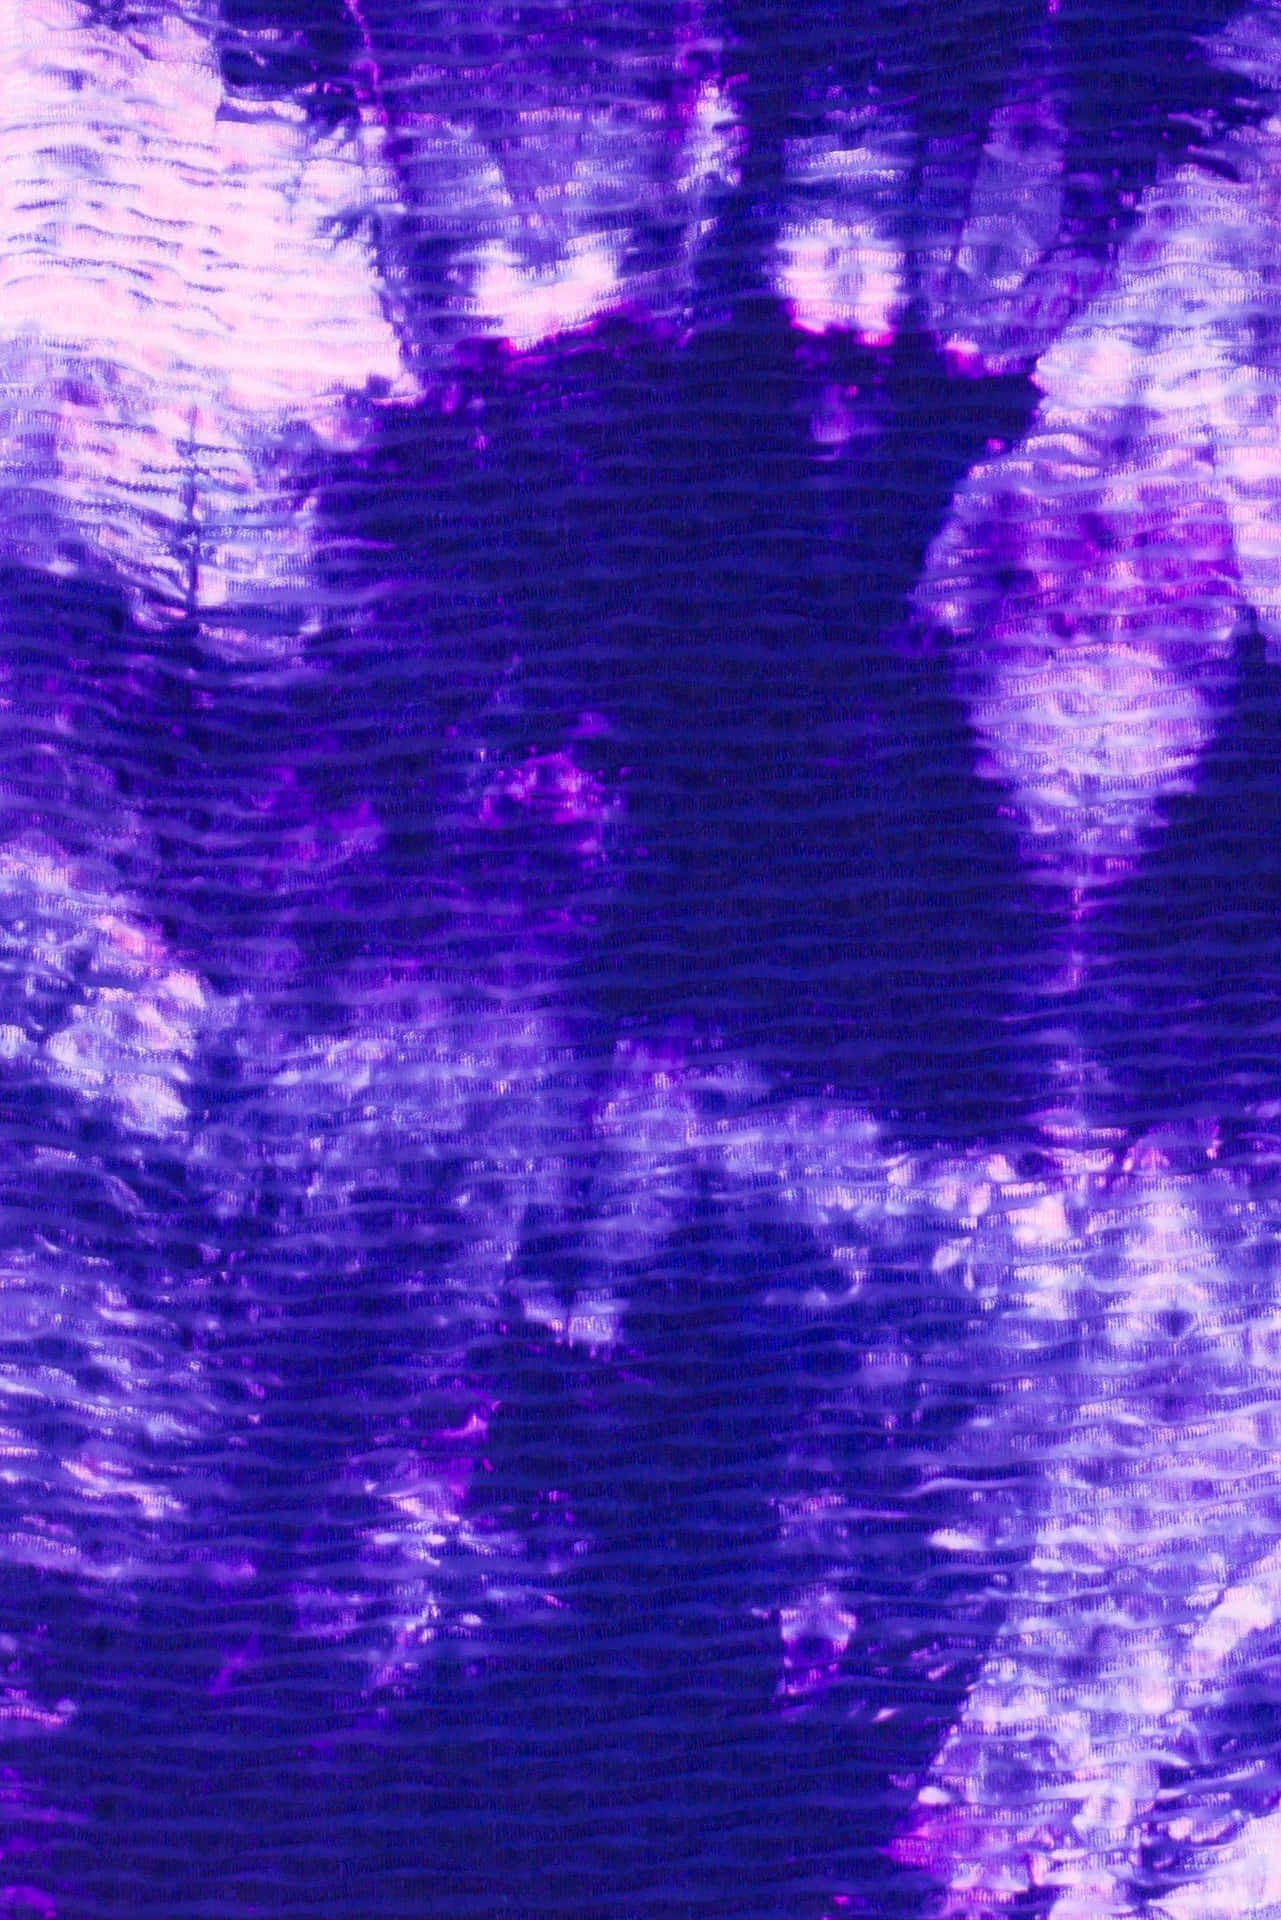 An Abstract Tie Dye Background in Shades of Purple Wallpaper